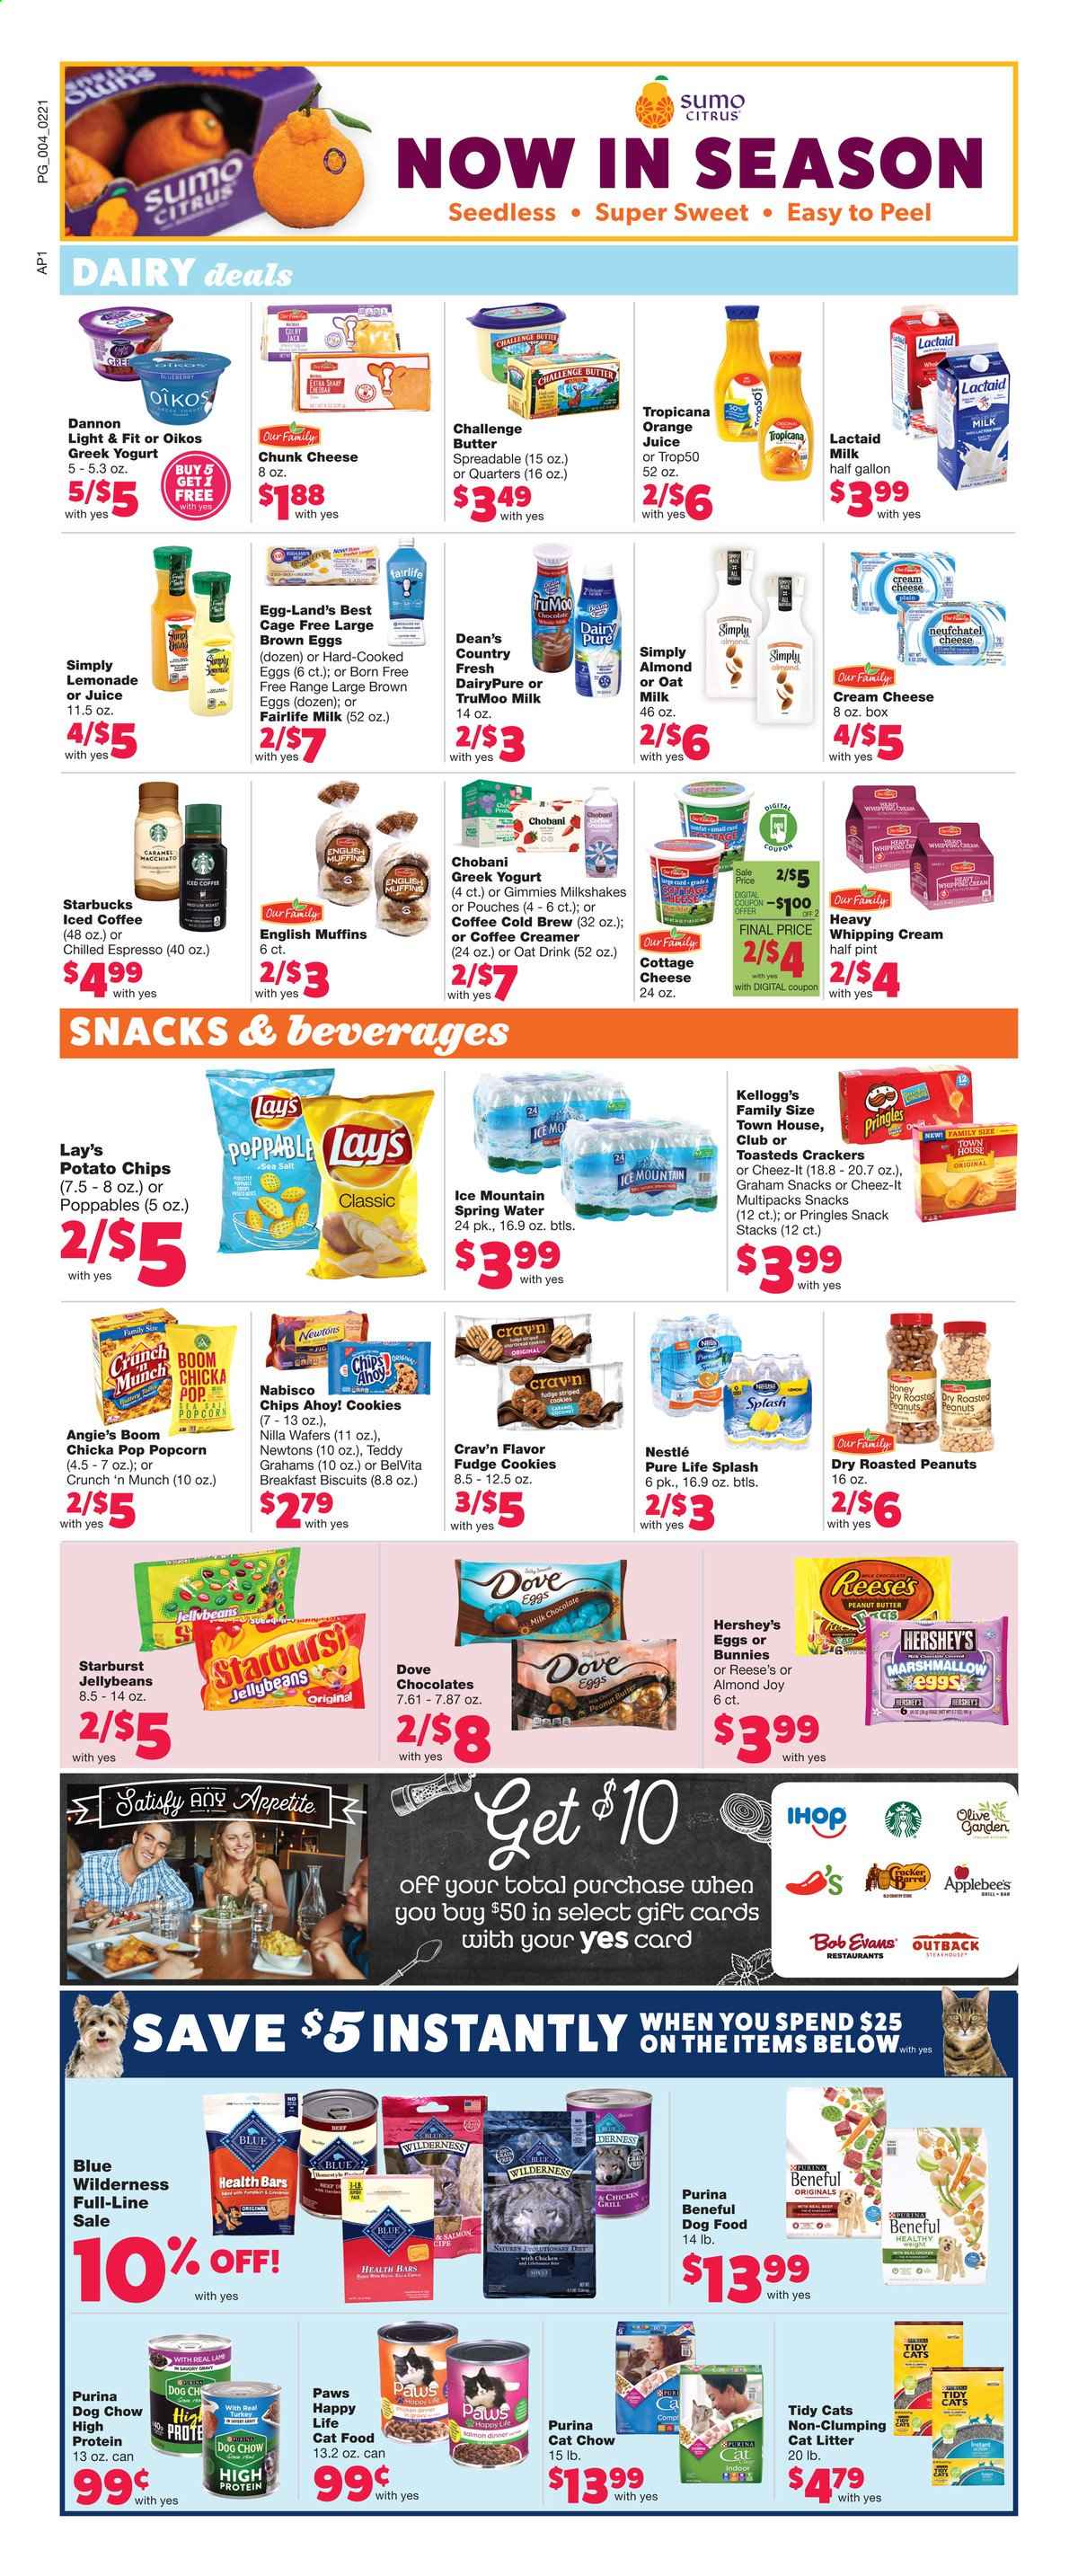 thumbnail - Family Fare Flyer - 02/21/2021 - 02/27/2021 - Sales products - muffin, salmon, cream cheese, english muffins, Bob Evans, cottage cheese, Lactaid, Neufchâtel, cheese, chunk cheese, greek yoghurt, yoghurt, Oikos, Chobani, Dannon, eggs, cage free eggs, creamer, coffee and tea creamer, whipping cream, Reese's, Hershey's, cookies, fudge, marshmallows, milk chocolate, Nestlé, wafers, chocolate, crackers, Kellogg's, biscuit, Chips Ahoy!, Starburst, potato chips, Pringles, chips, snack, Lay’s, popcorn, Cheez-It, sea salt, belVita, caramel, peanut butter, almonds, roasted peanuts, lemonade, orange juice, juice, spring water, Ice Mountain, iced coffee, Starbucks, Dove, Joy. Page 5.